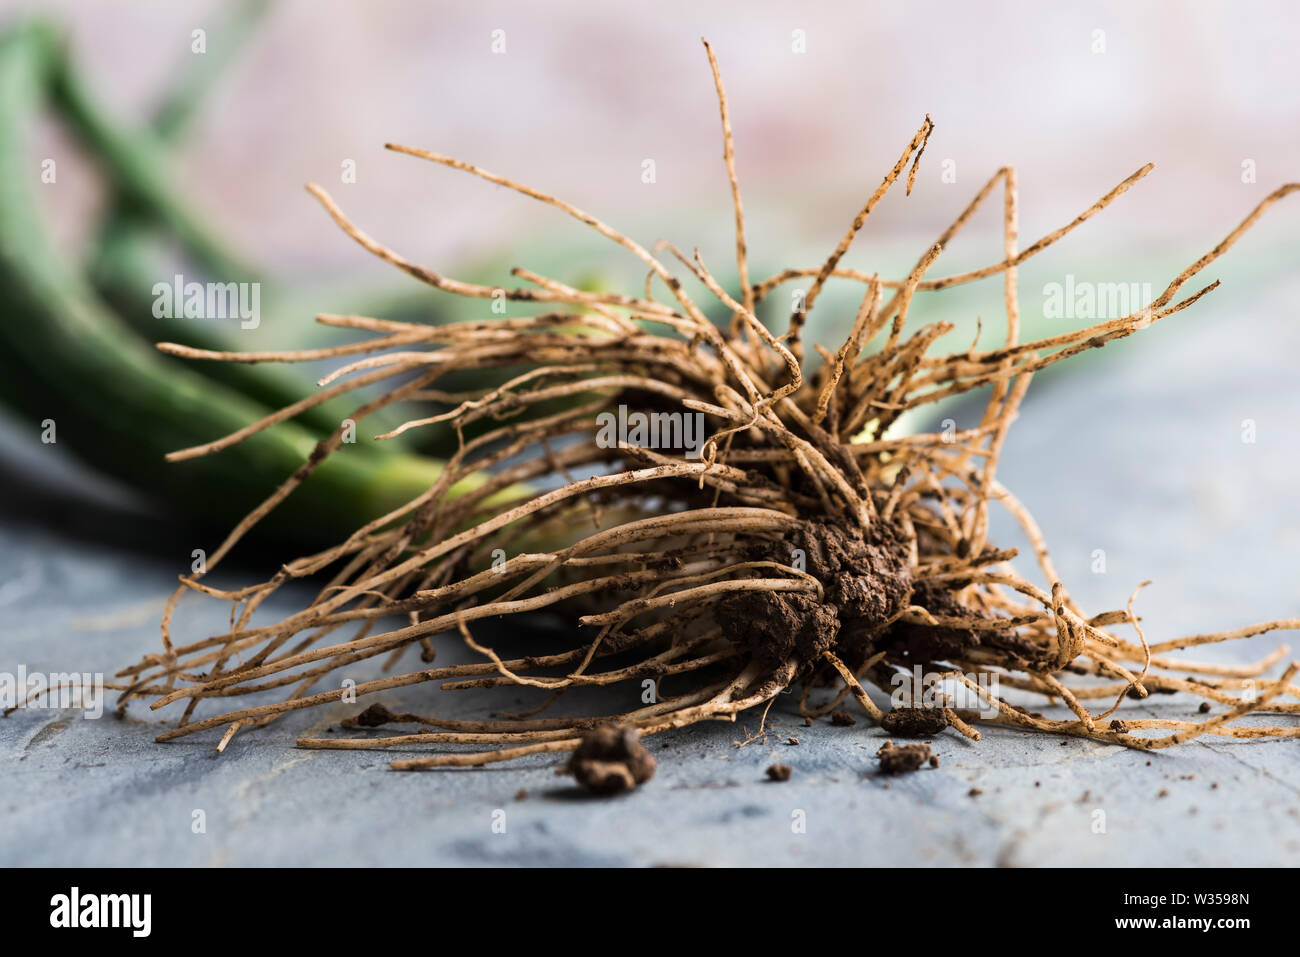 Raw spring onions with roots and mud, close up focussed on the roots Stock Photo